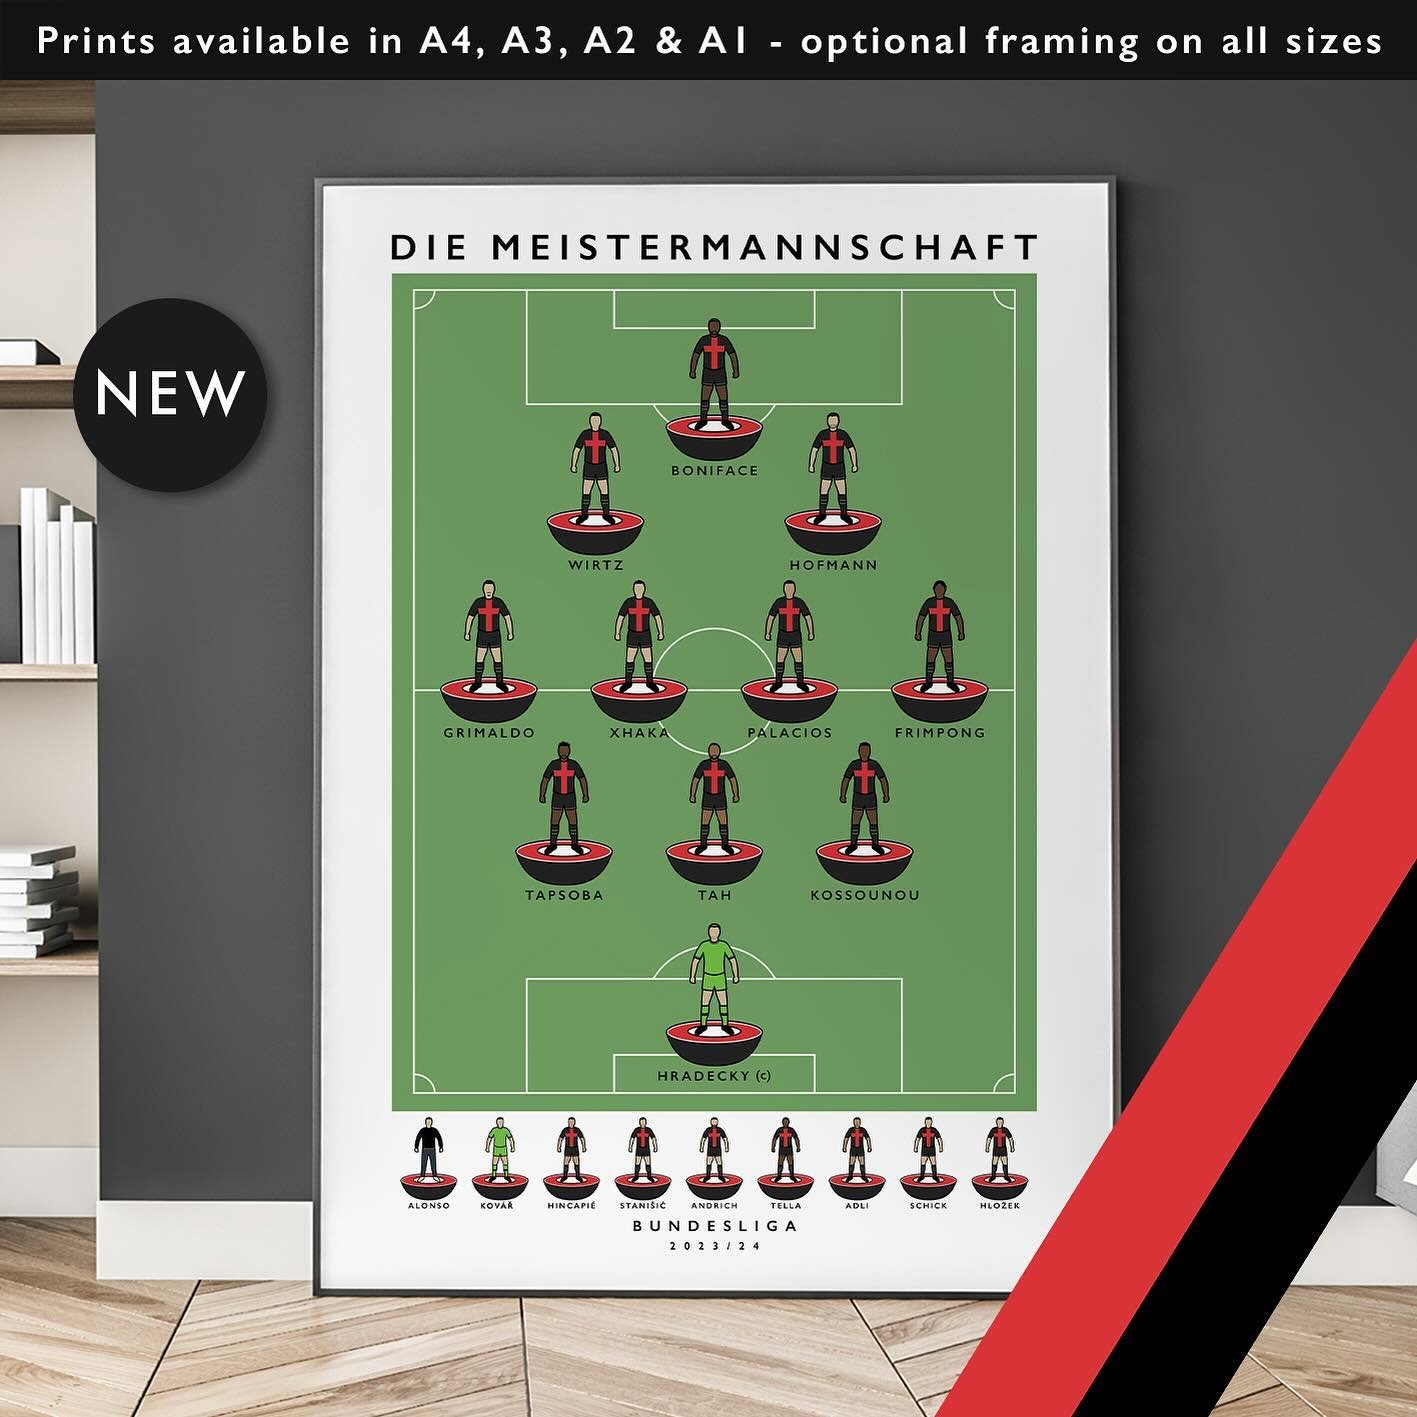 NEW: Bayer Leverkusen Die Meistermannschaft 23/24 

Prints available in A4, A3, A2 &amp; A1 with optional framing 

Get 10% off until midnight on Monday with the discount code 
DIE-WERKSELF

Shop now: matthewjiwood.com/subbuteo-xis/b&hellip;

#BayerL